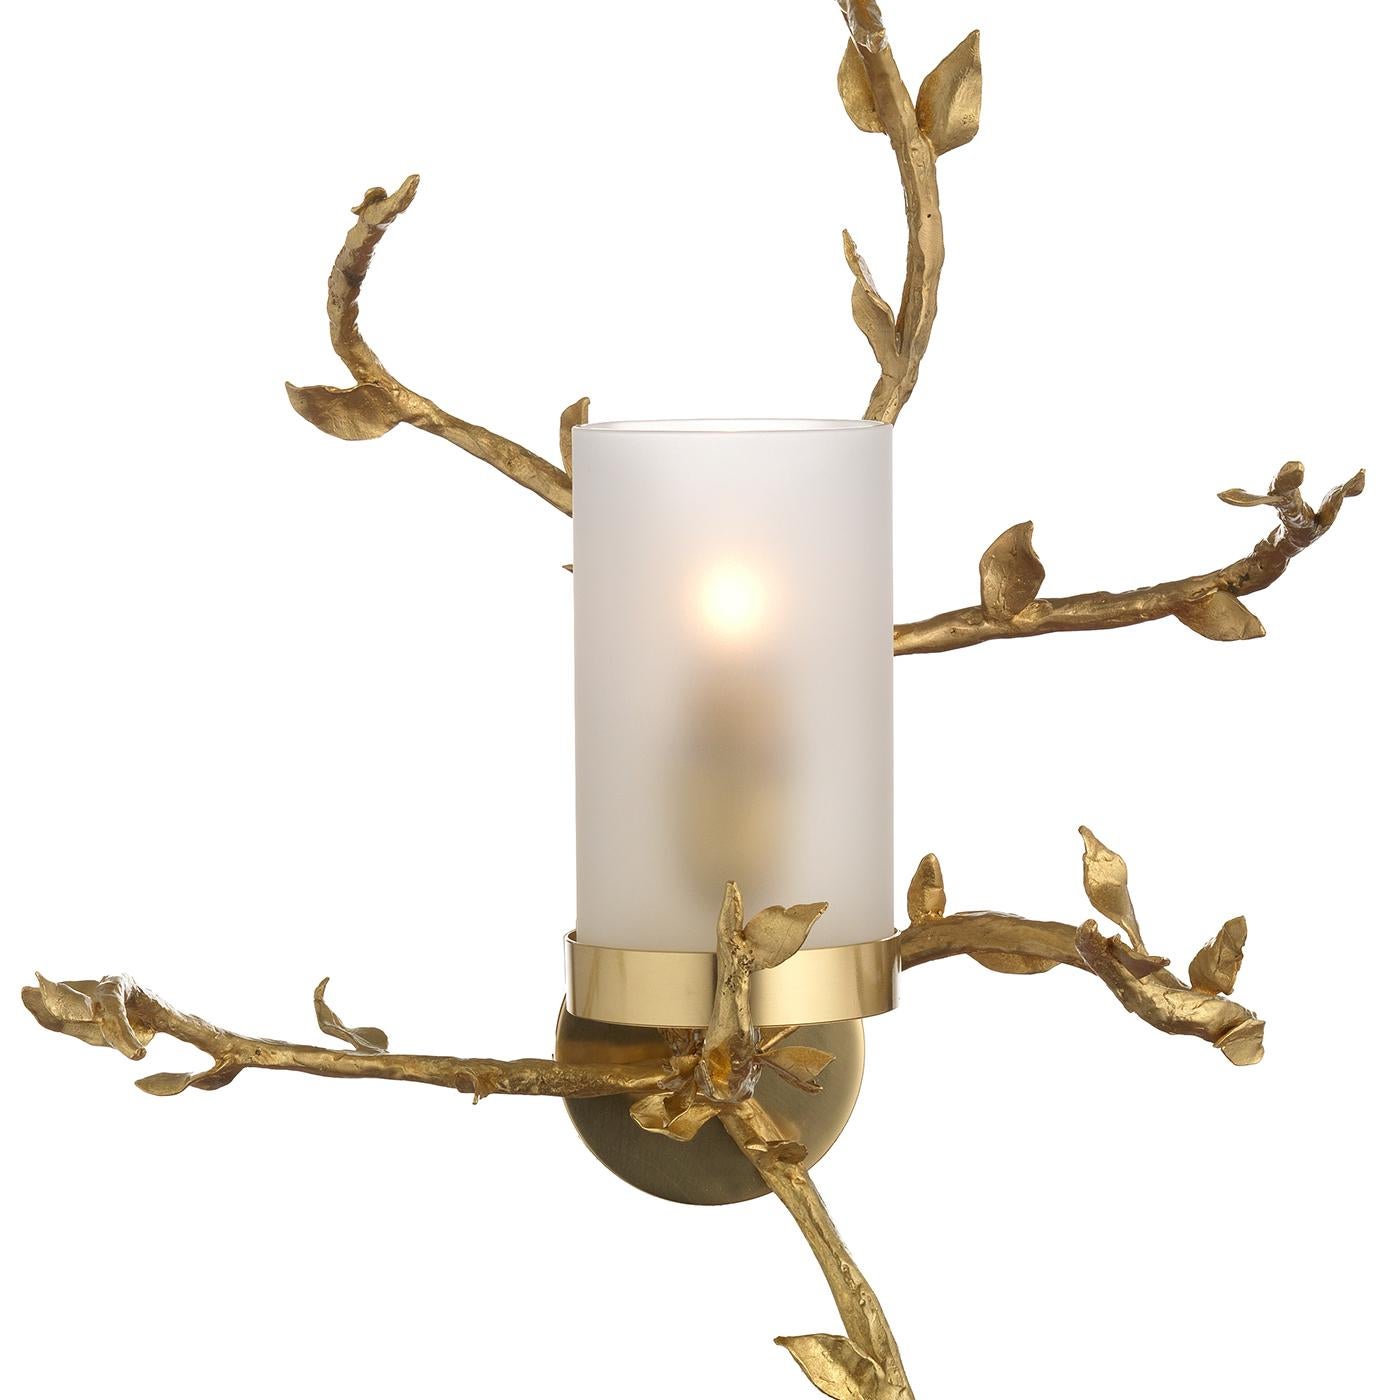 Eclectic and sophisticated, this elegant sconce will be eye-catching in any interior, adding light to a room, while also creating a wall decoration of strong visual impact. Its structure is entirely made of brass with a natural finish and comprises